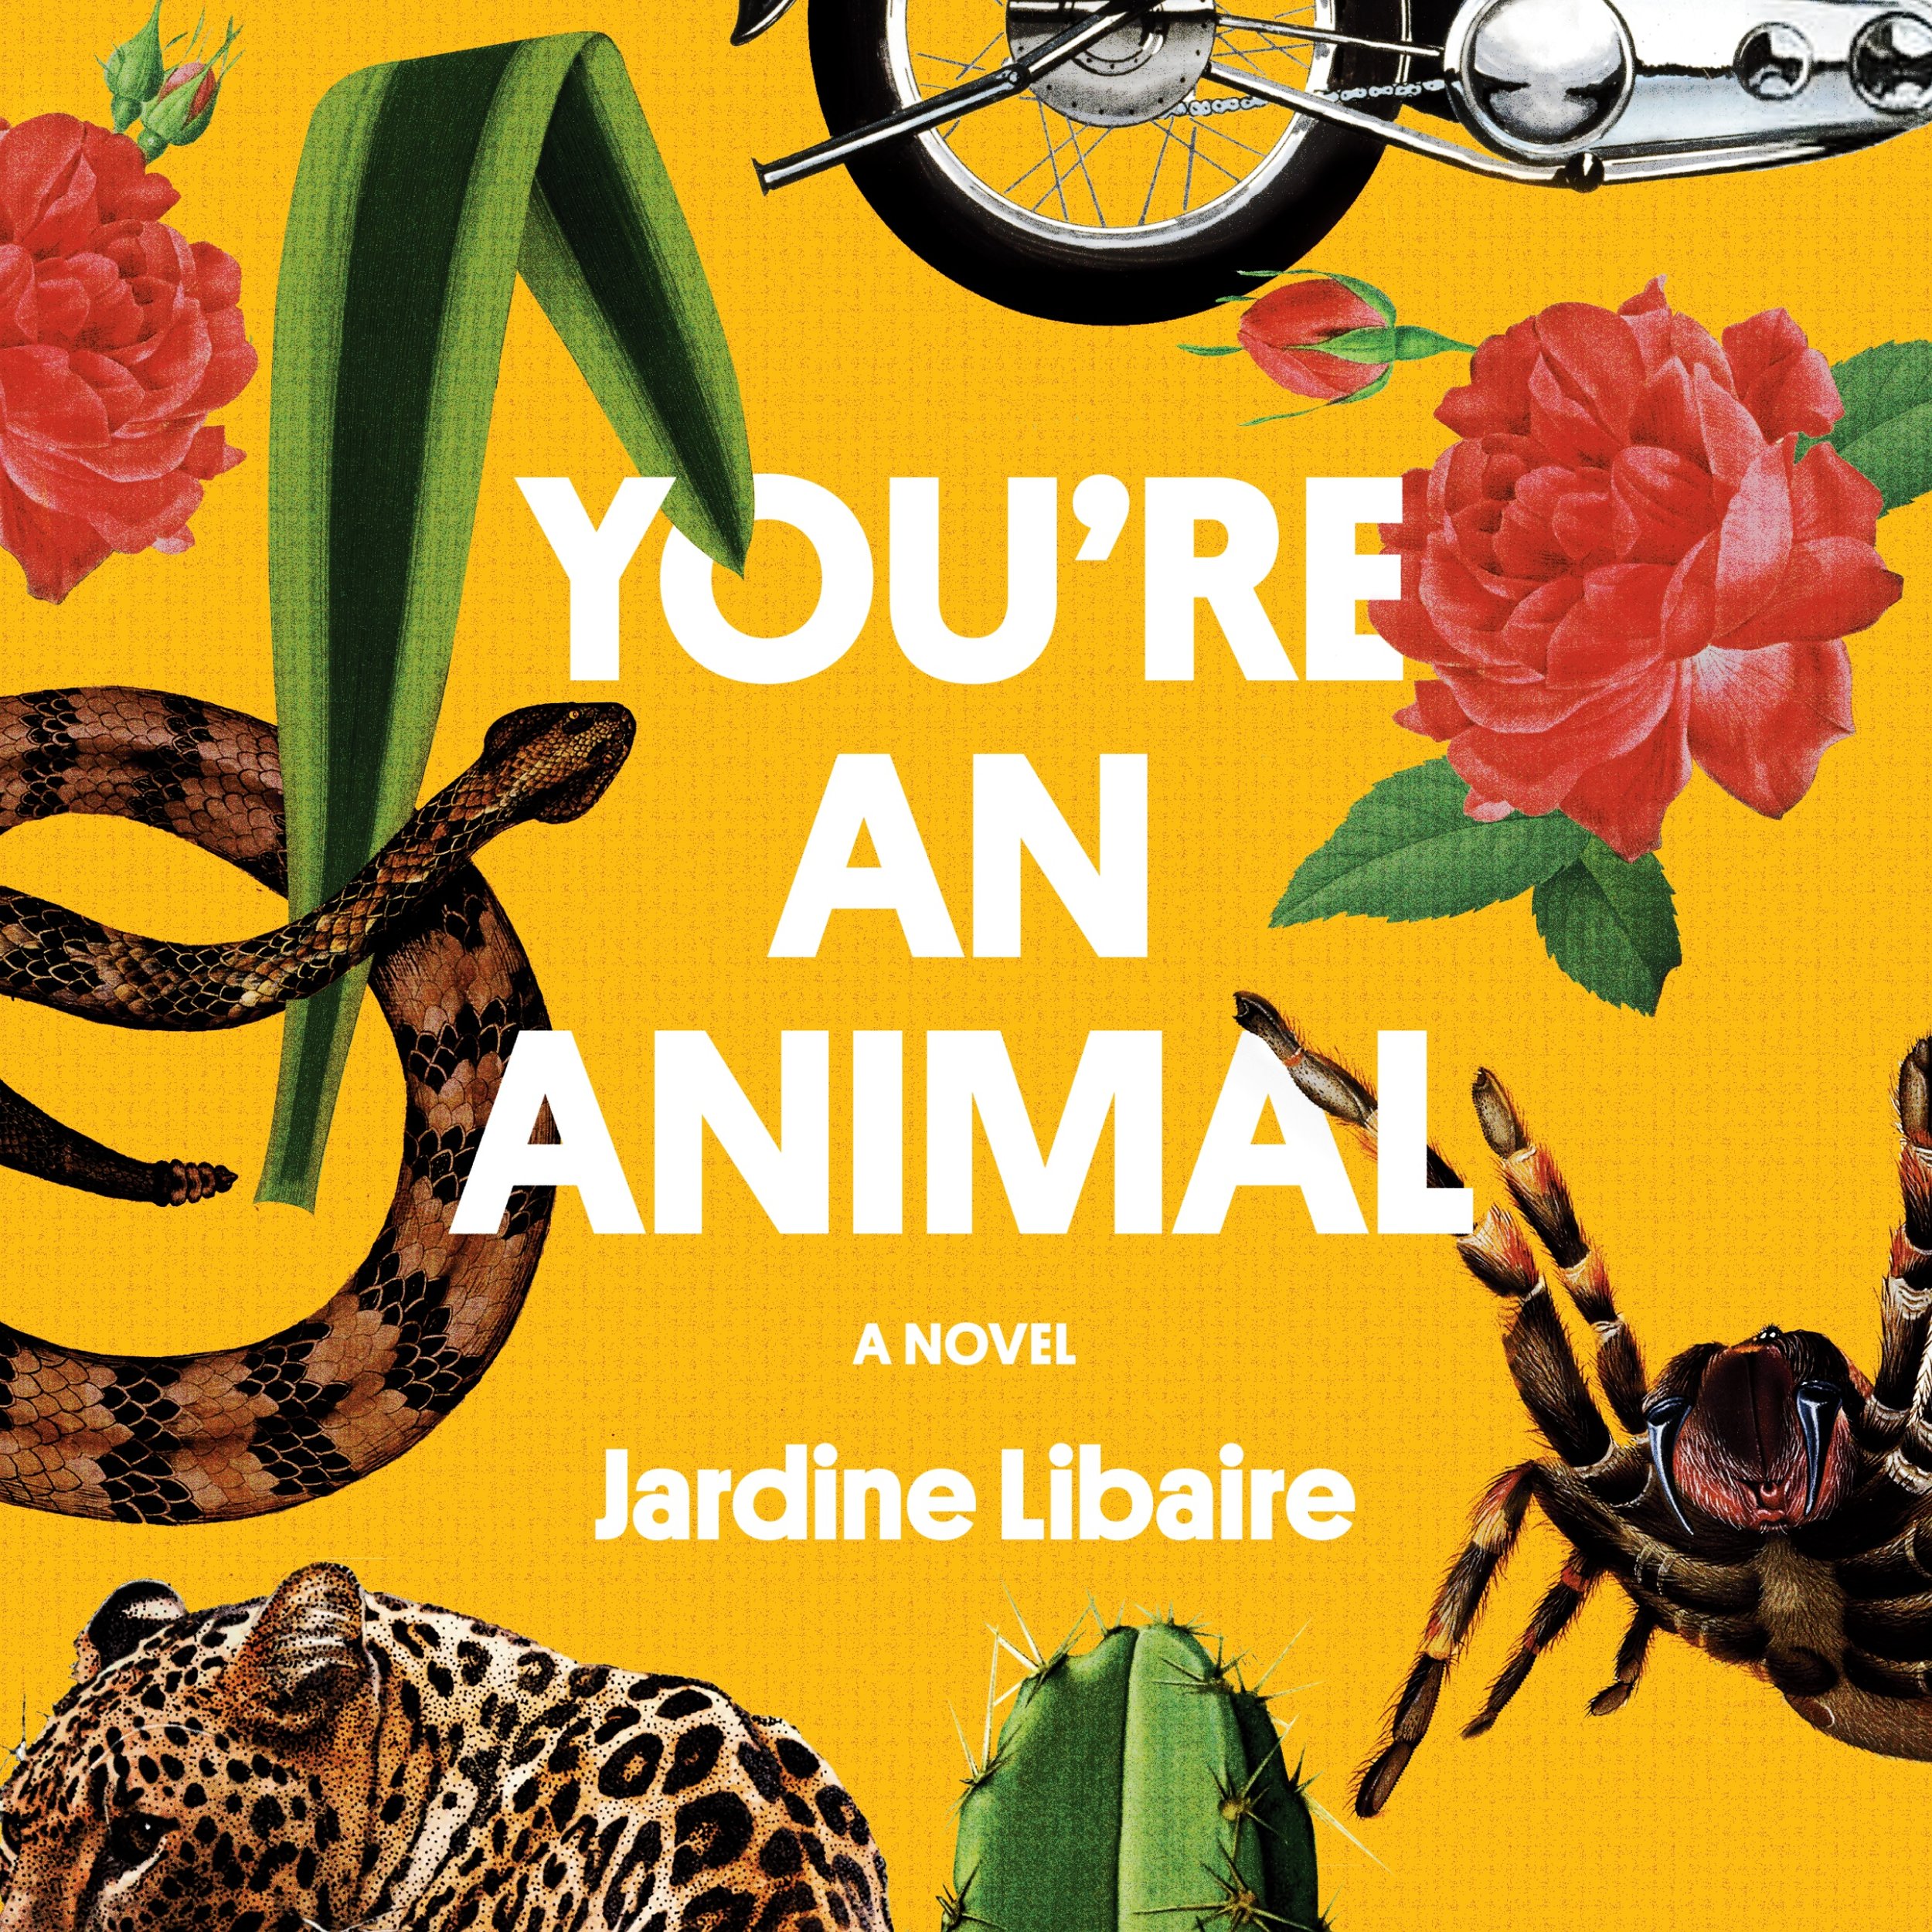 You're An Animal by Jardine Libaire